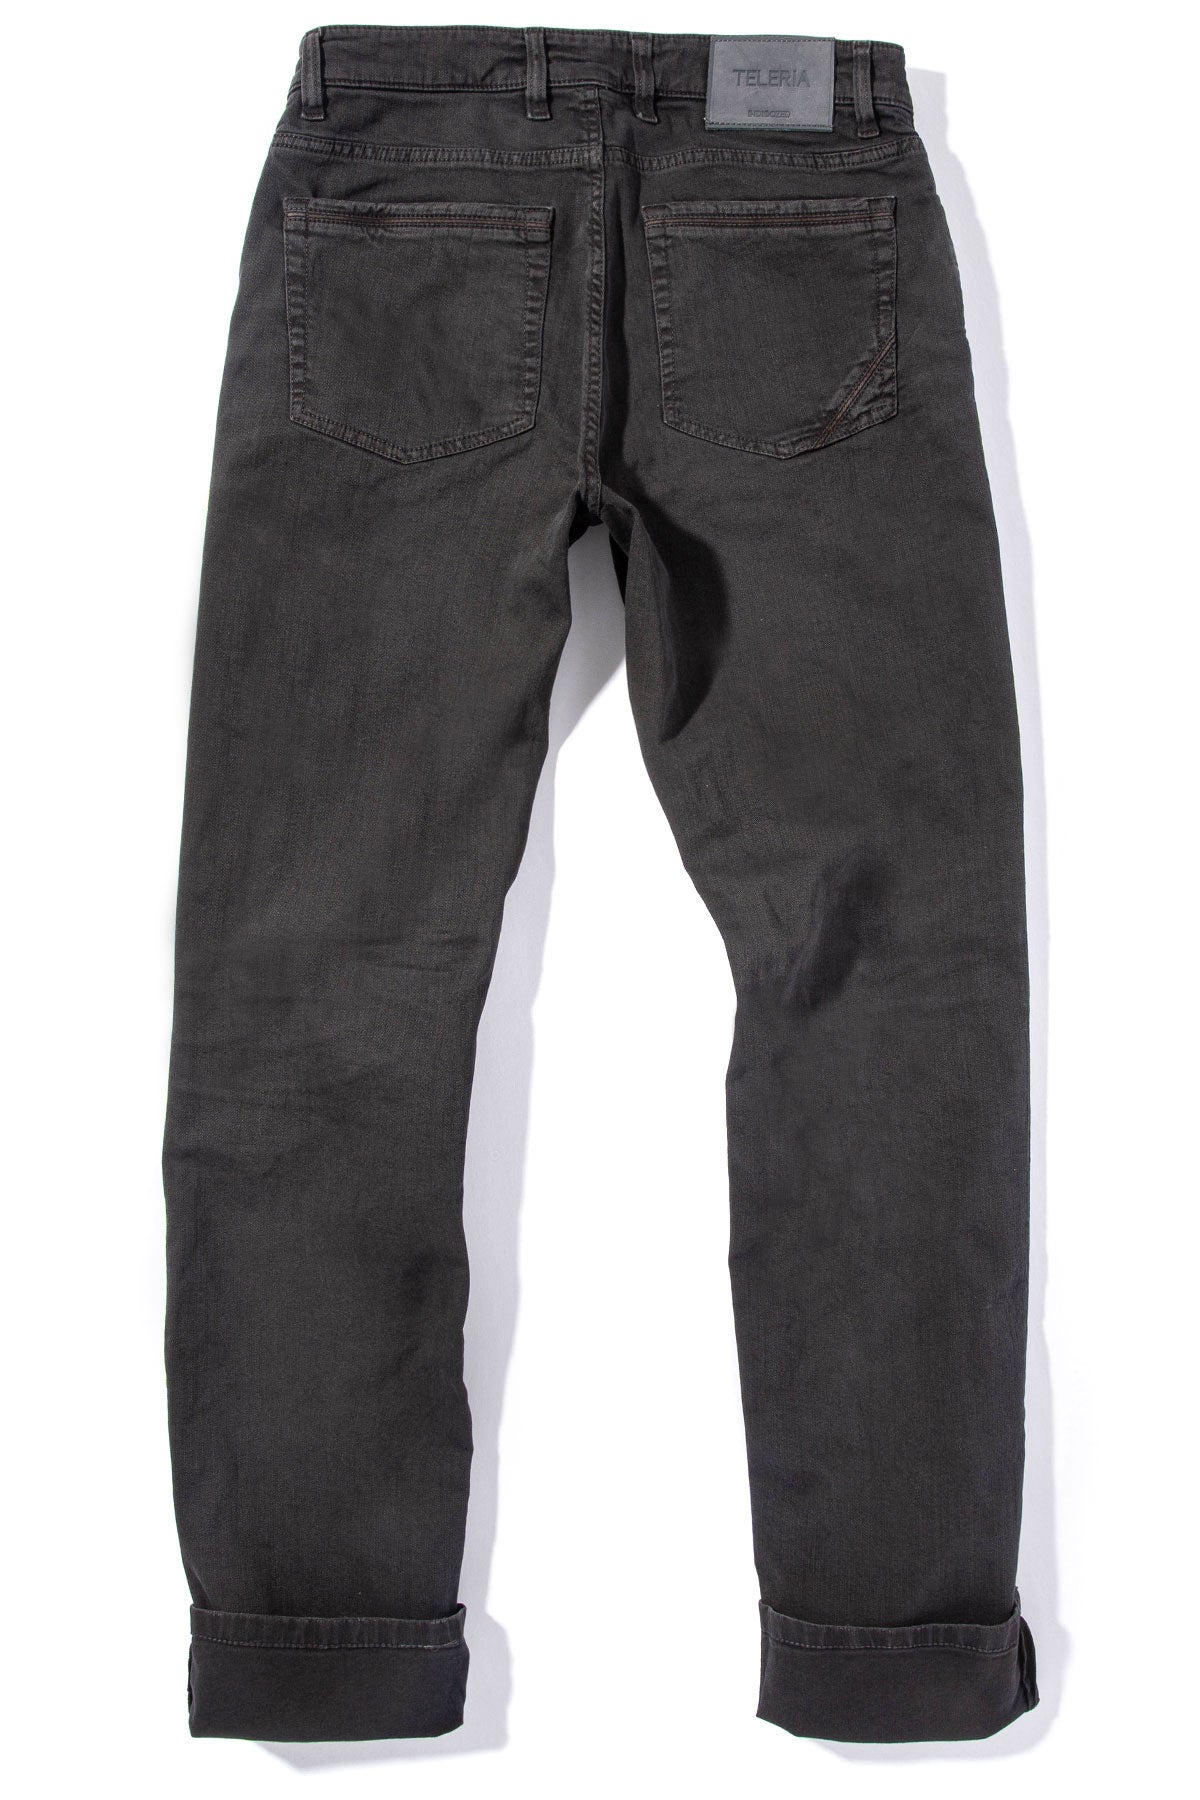 Ouray 5-Pocket Stretch Twill in Antracite | Mens - Pants - 5 Pocket | Teleria Zed